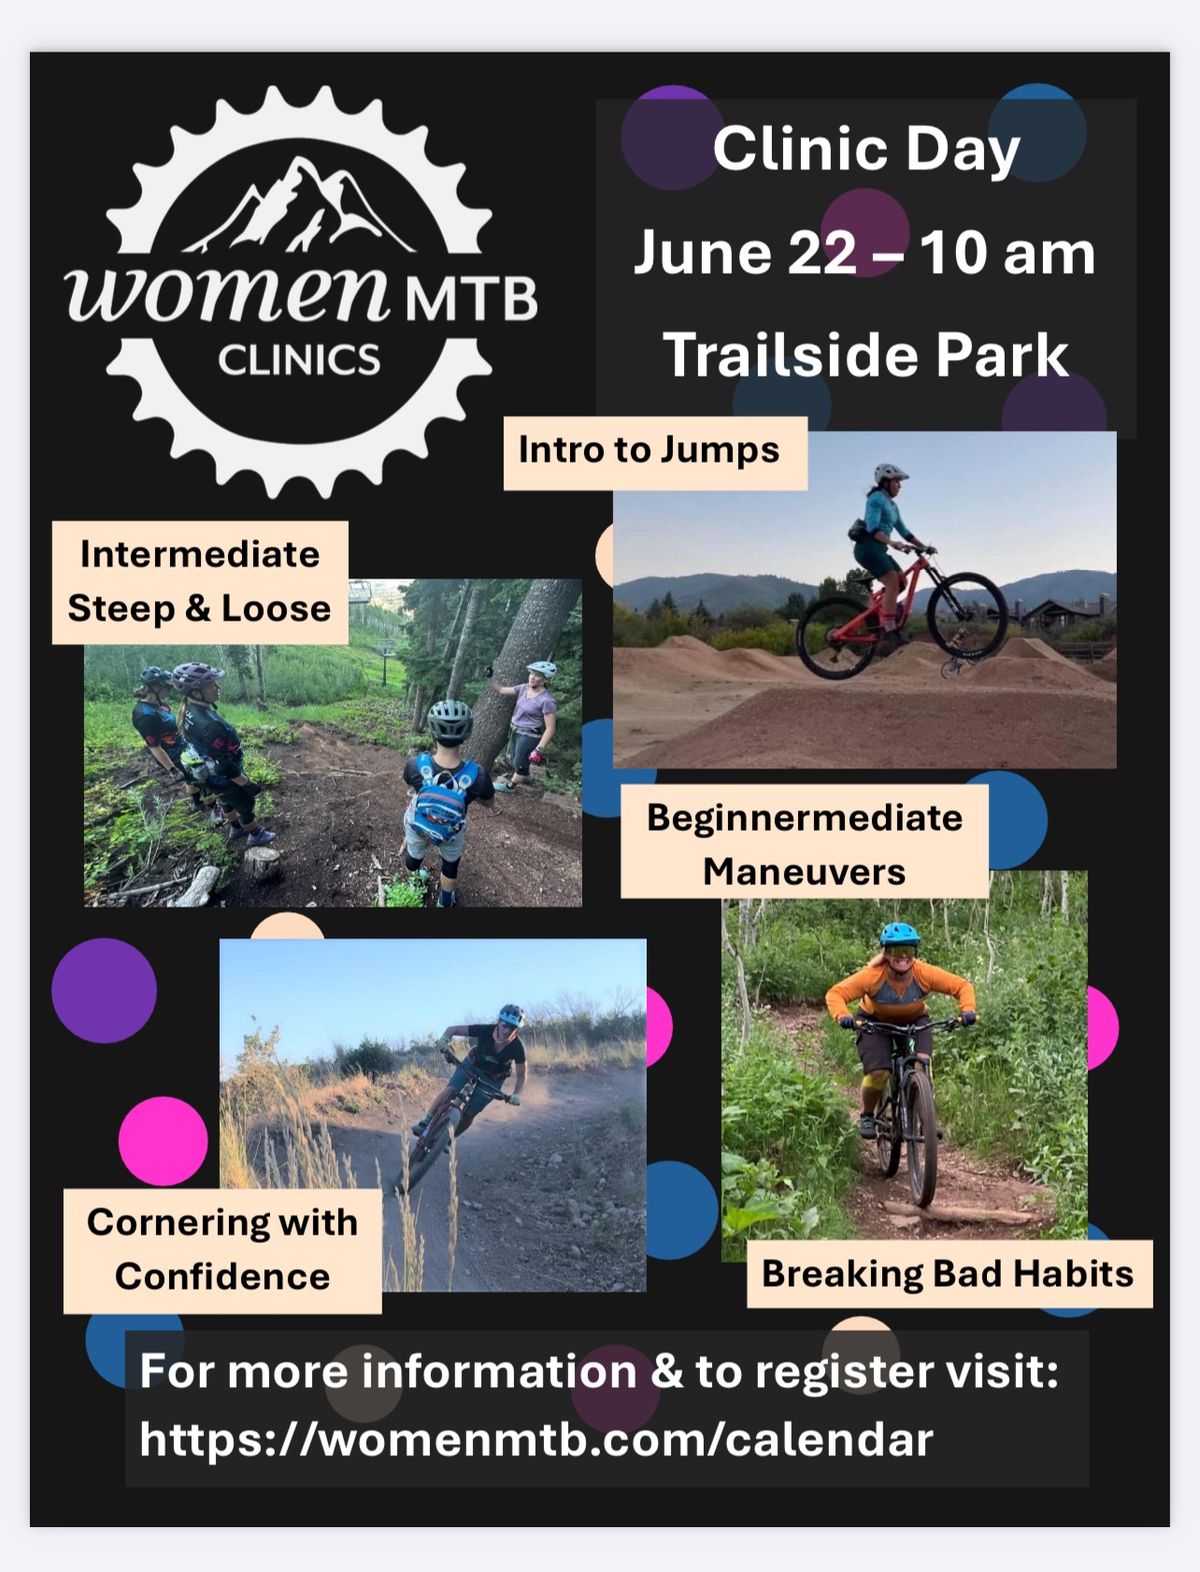 WomenMTB Annual Clinic Day